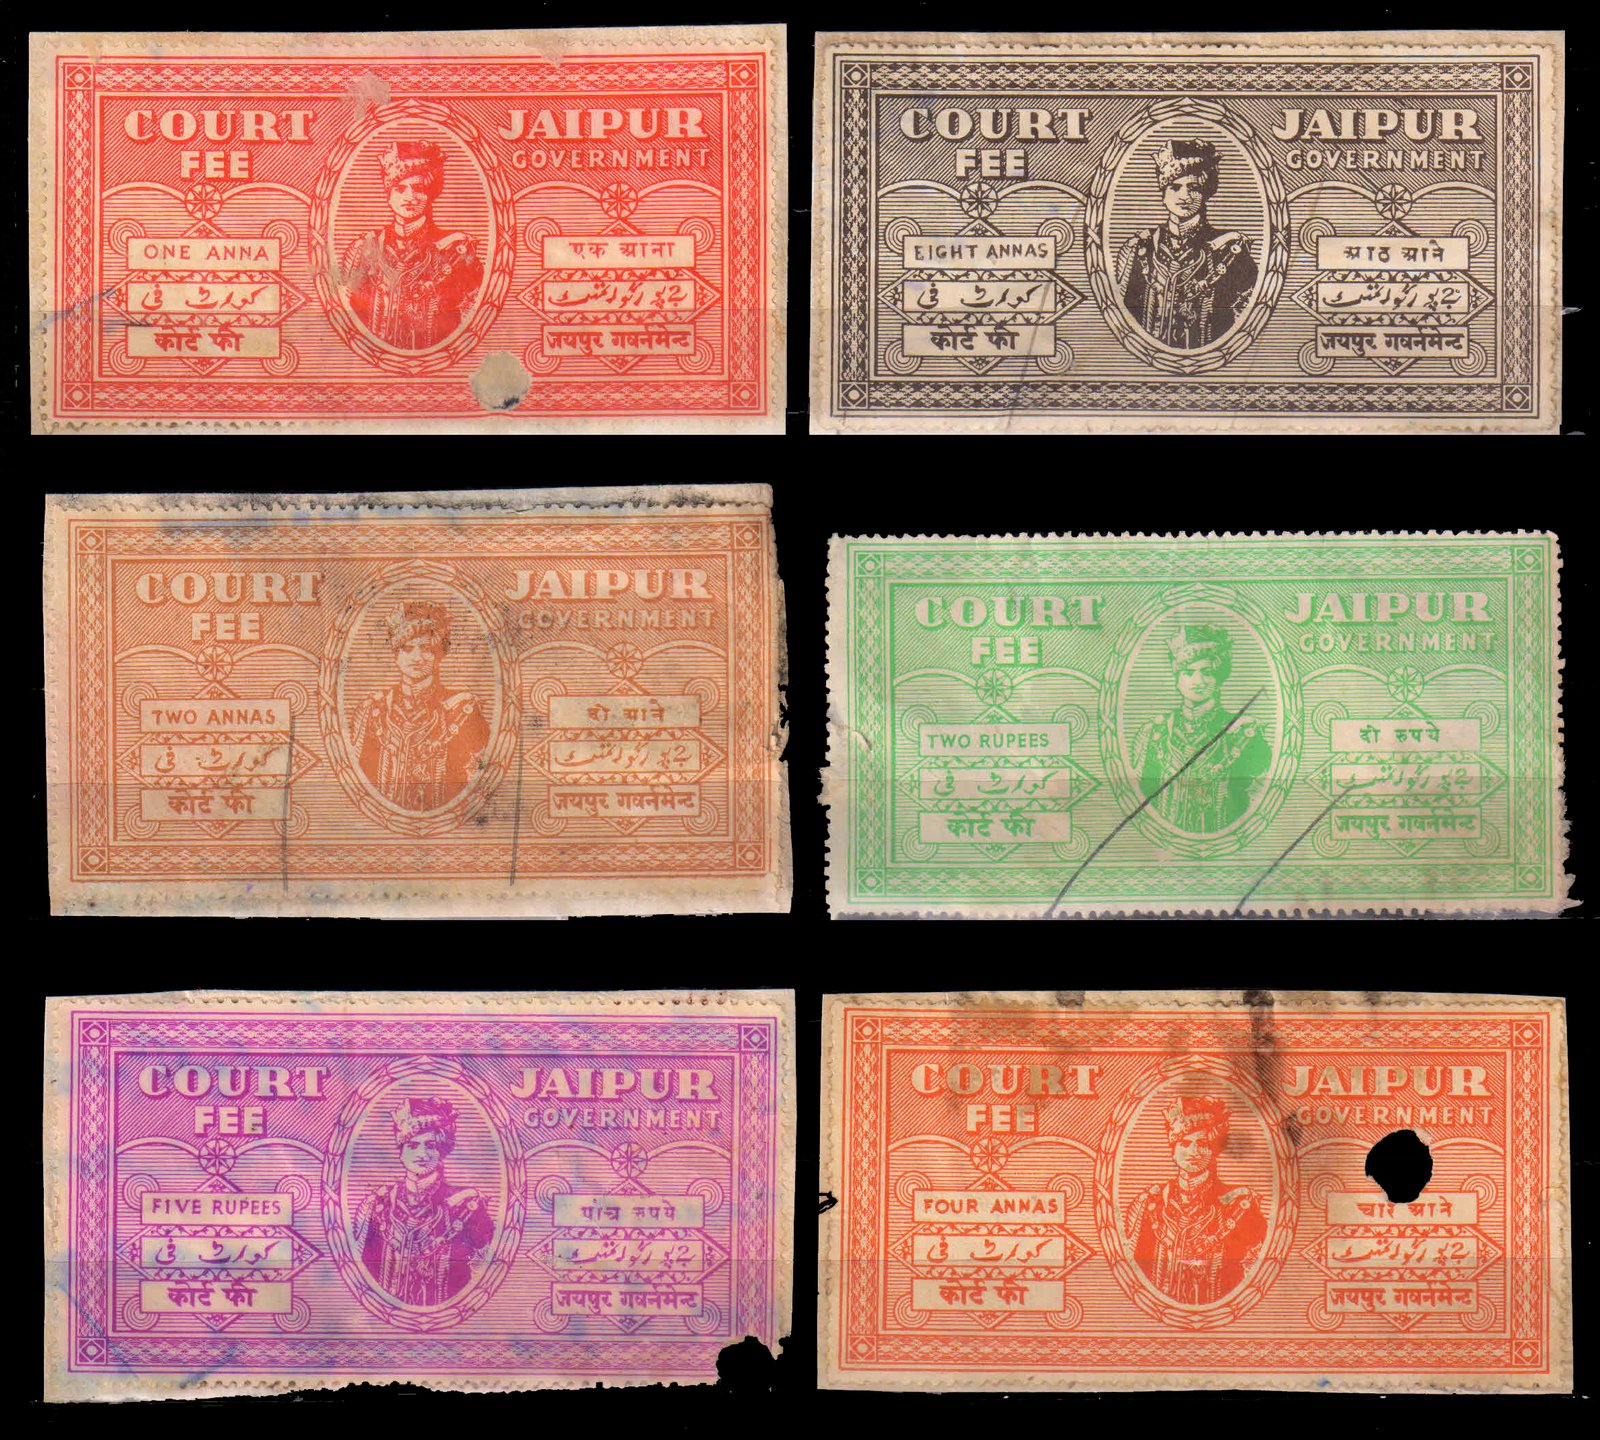 JAIPUR STATE, Fiscal Court Fee Stamps, Used-6 Different,1 Anna to 5 Rs.-Pre 1949 Issue